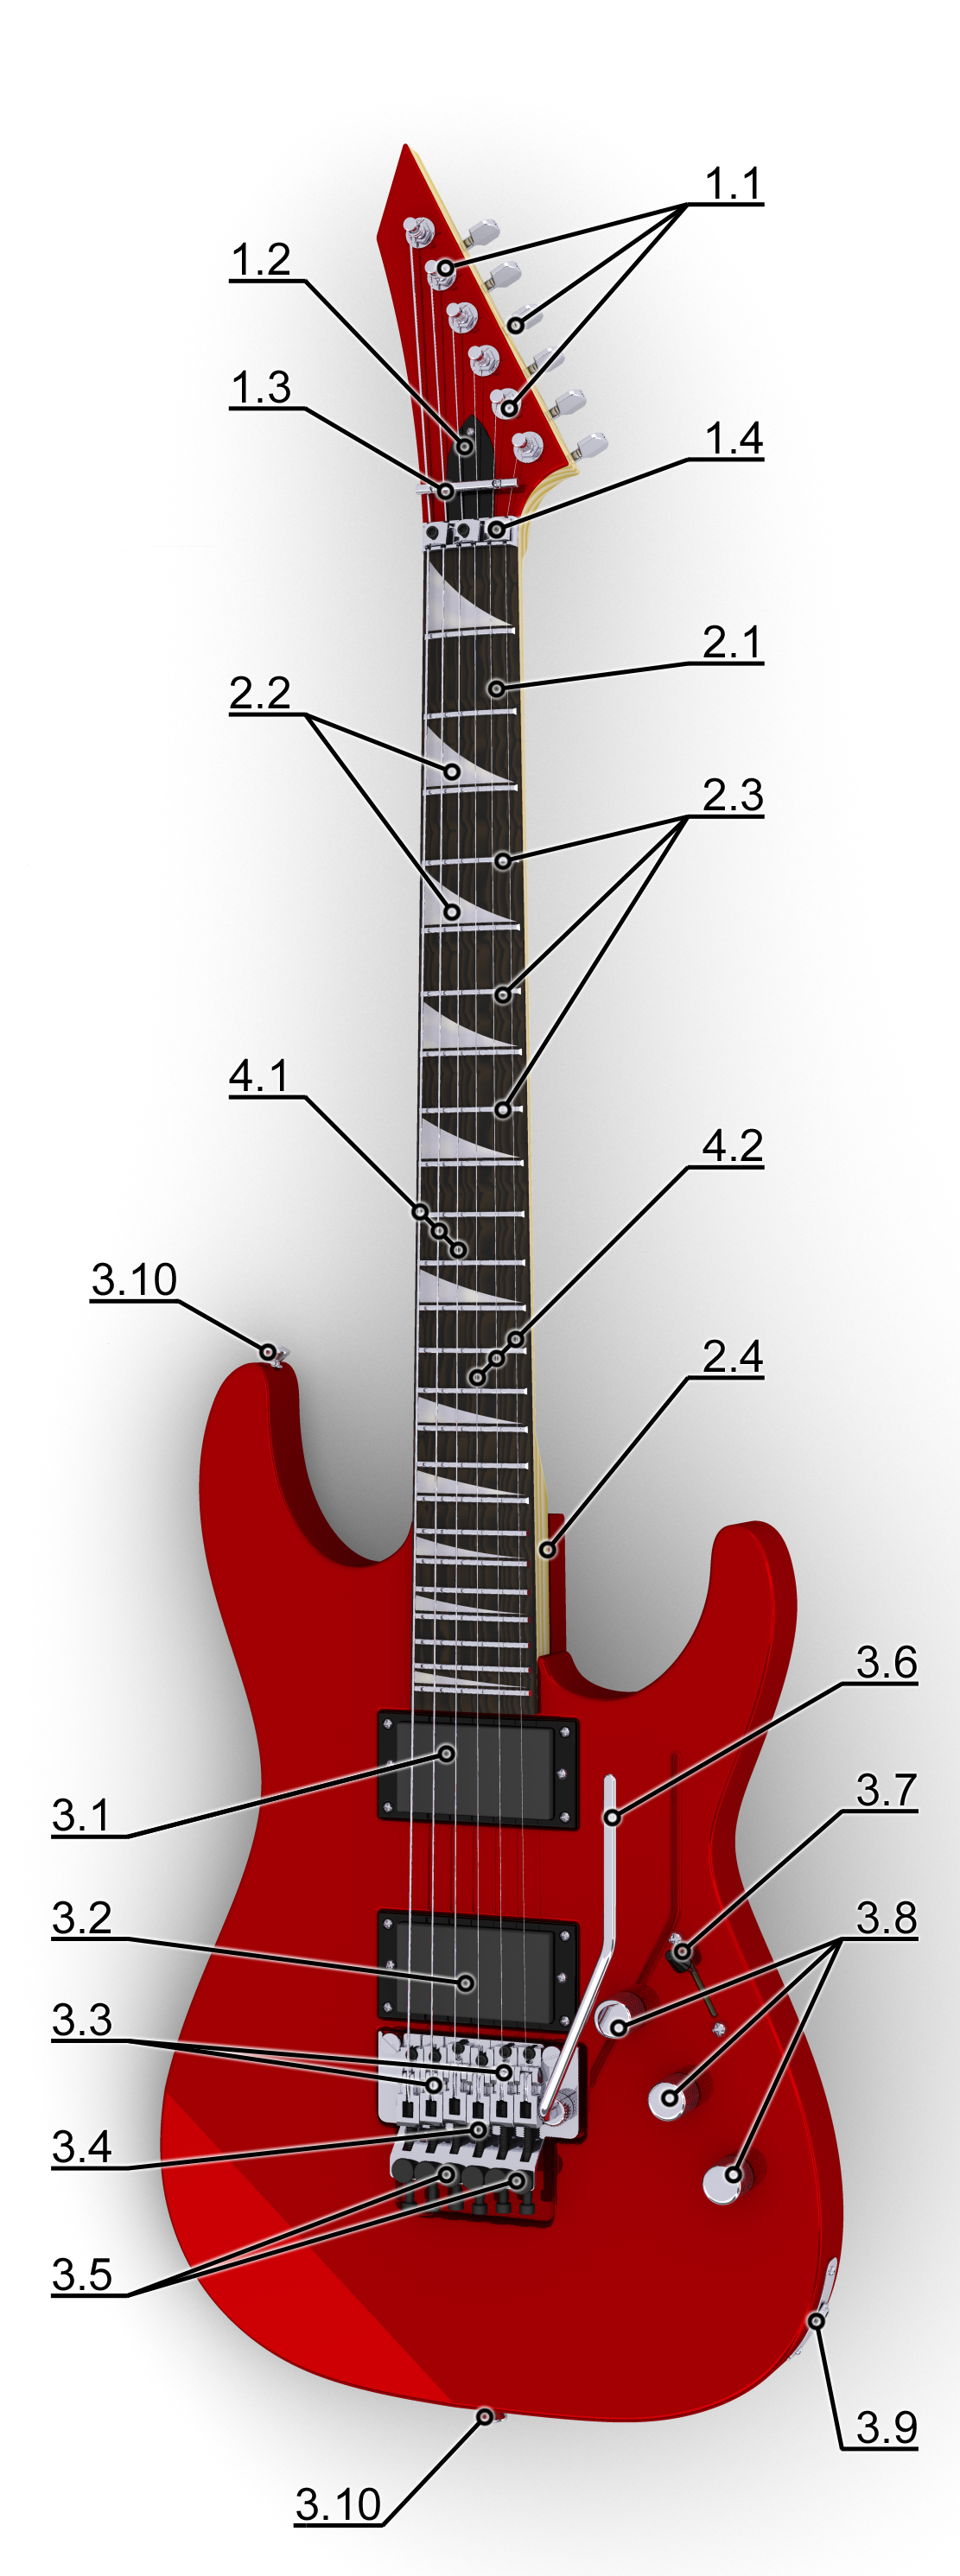 http://upload.wikimedia.org/wikipedia/commons/a/a5/Electric_Guitar_(Superstrat_based_on_ESP_KH_-_vertical)_-_with_hint_lines_and_numbers.png